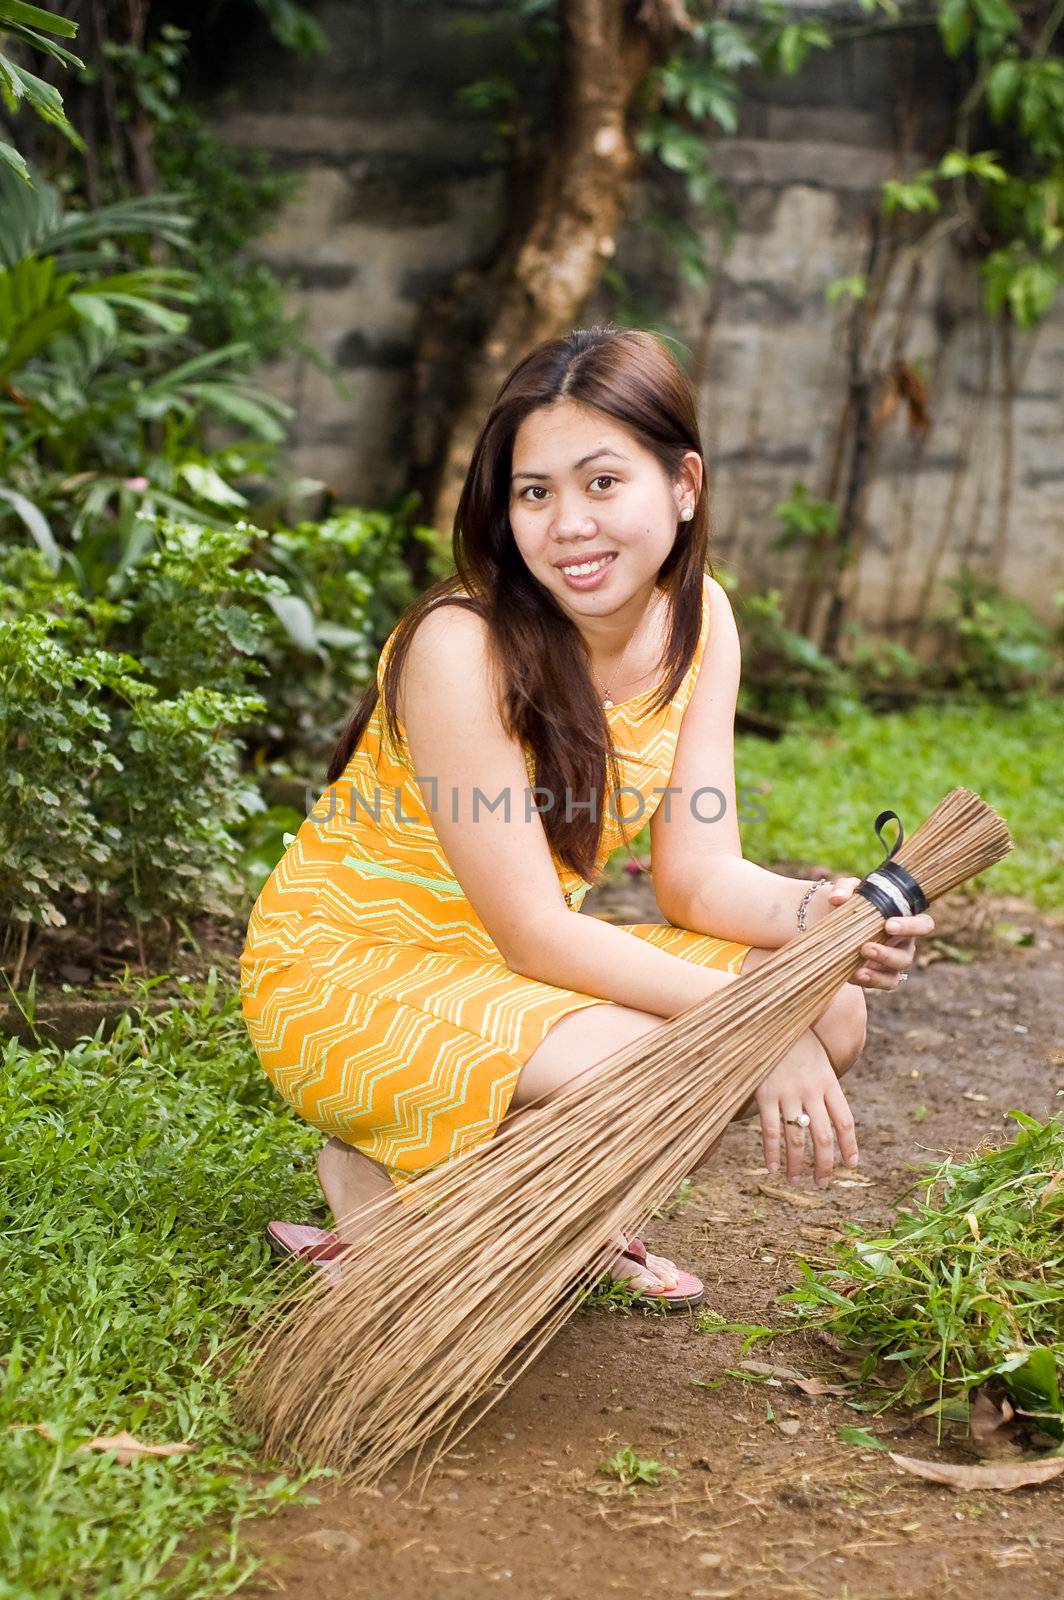 Gorgeous lady holding a broom crouched on garden